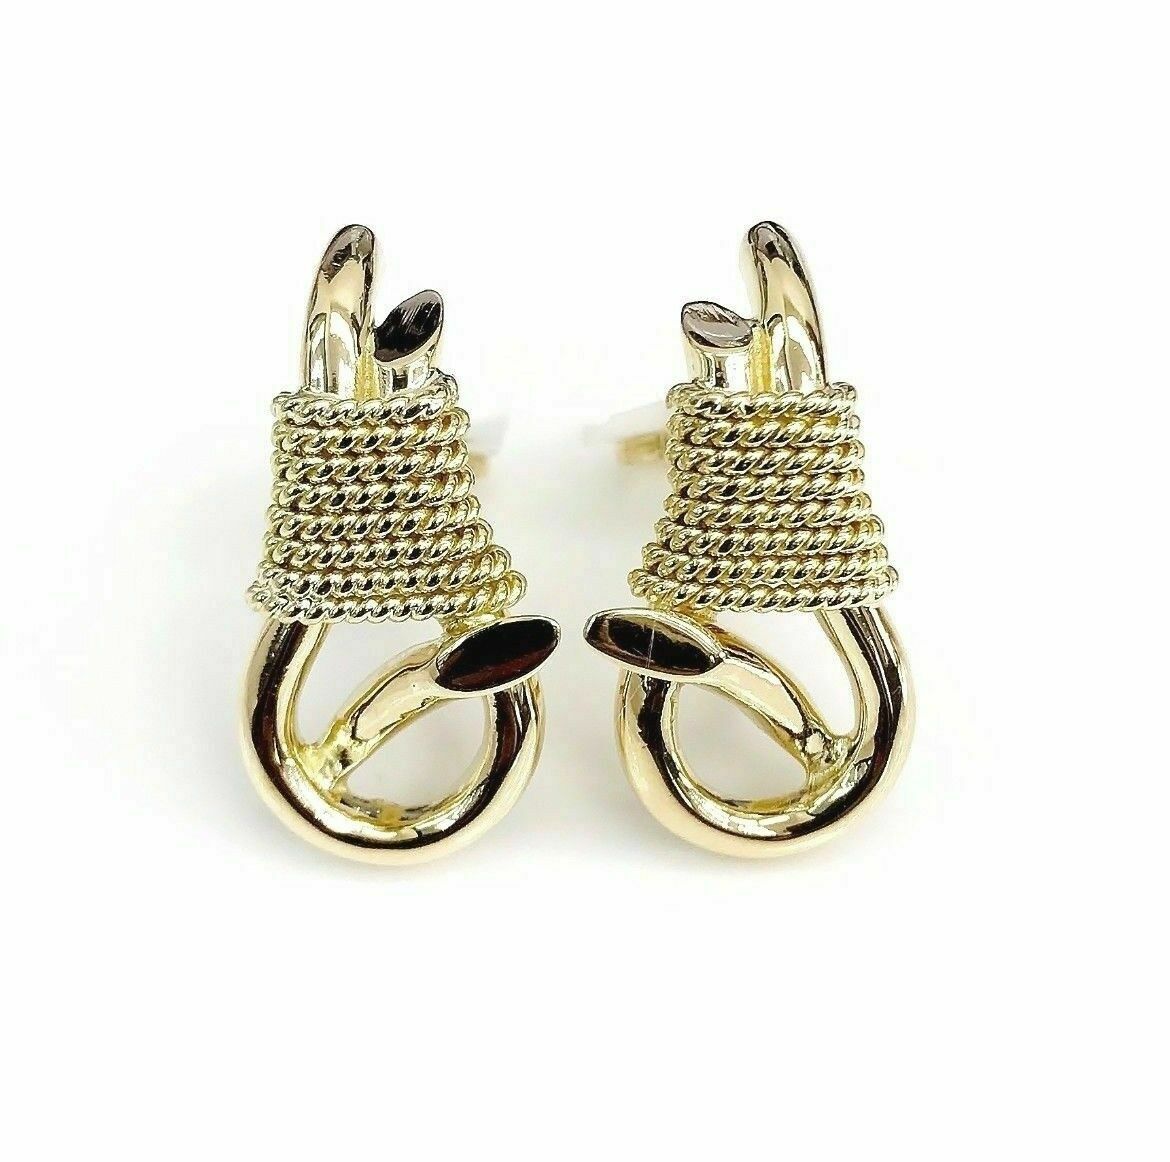 Solid 18 Karat Yellow Gold Knot Earrings with French Clips 1.10 x 0.50 In 15.8GR